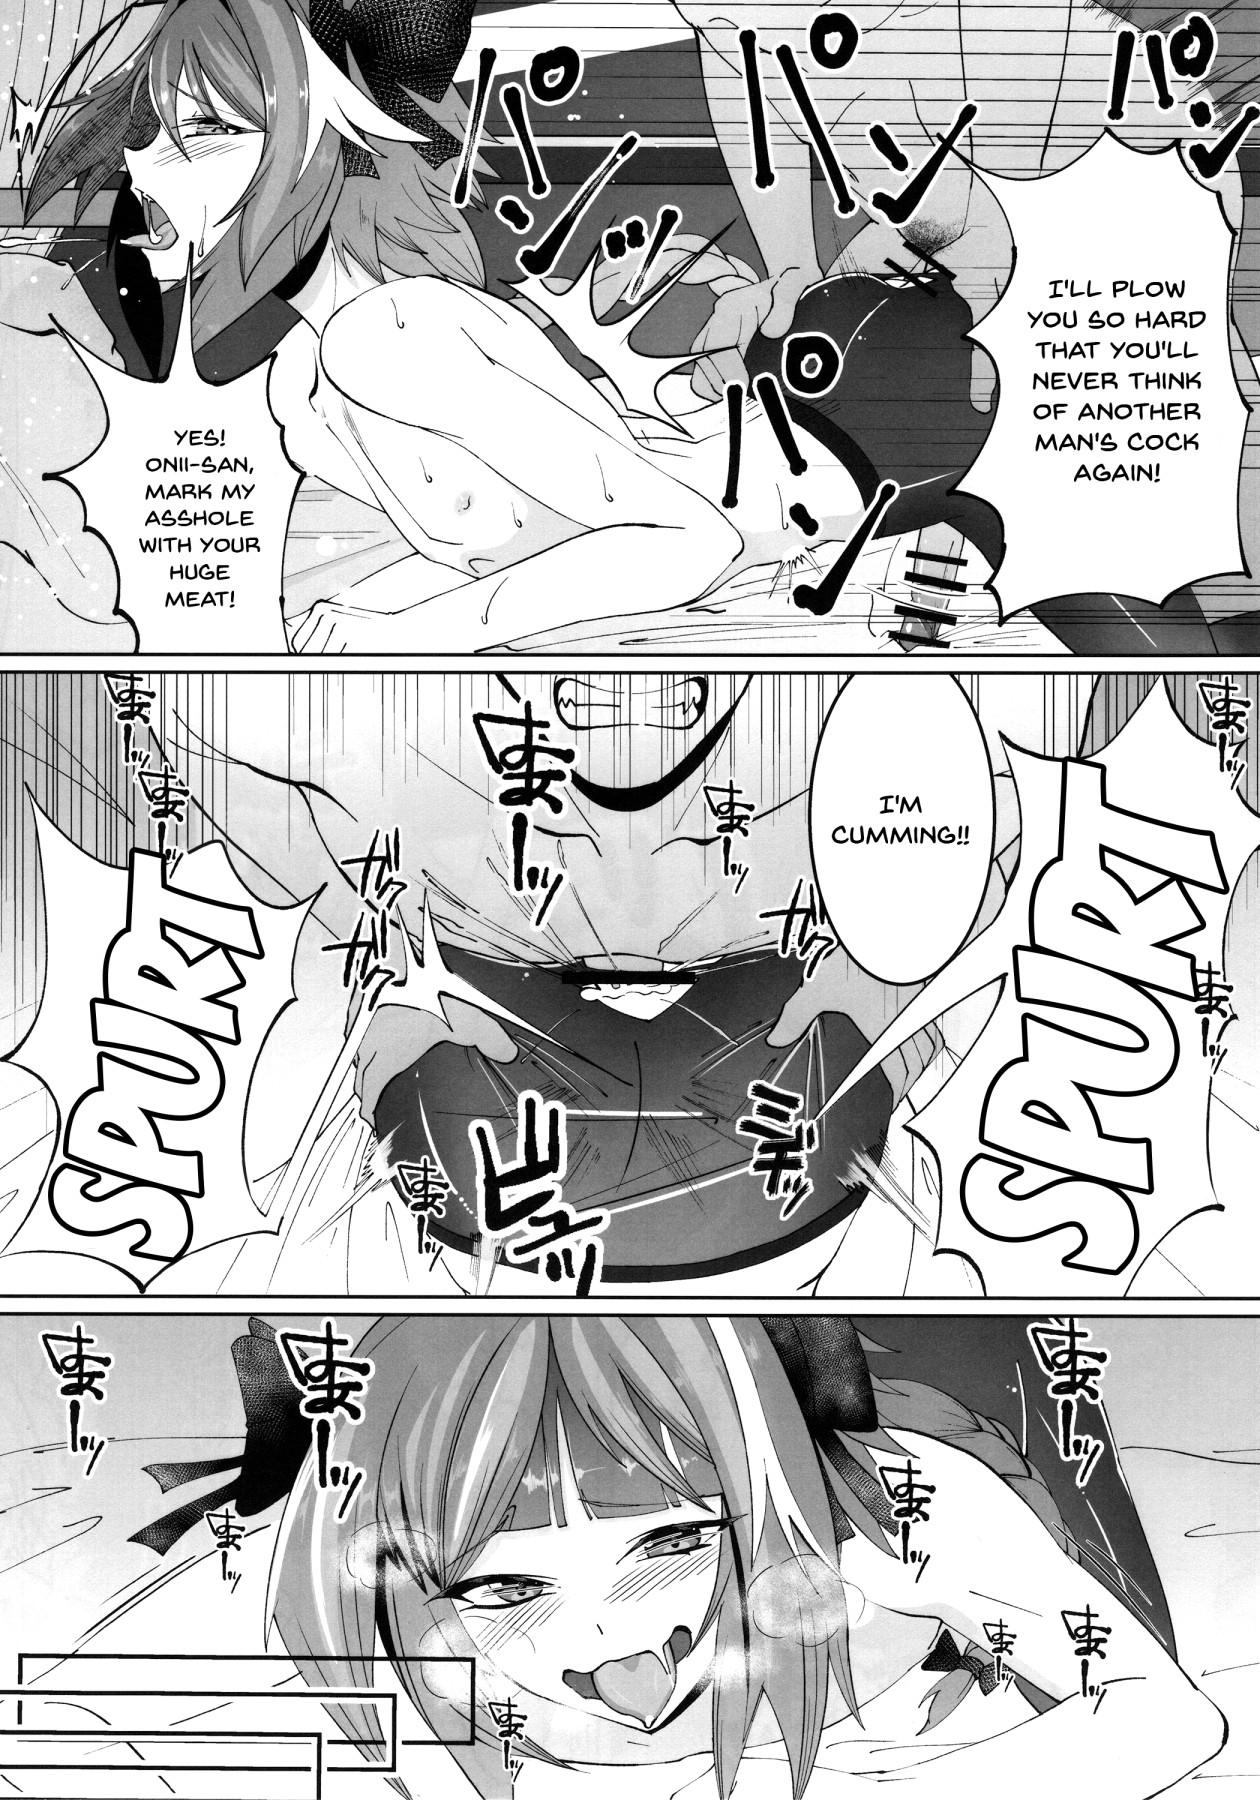 Home Deal With The Devil - Fate grand order Pov Sex - Page 15